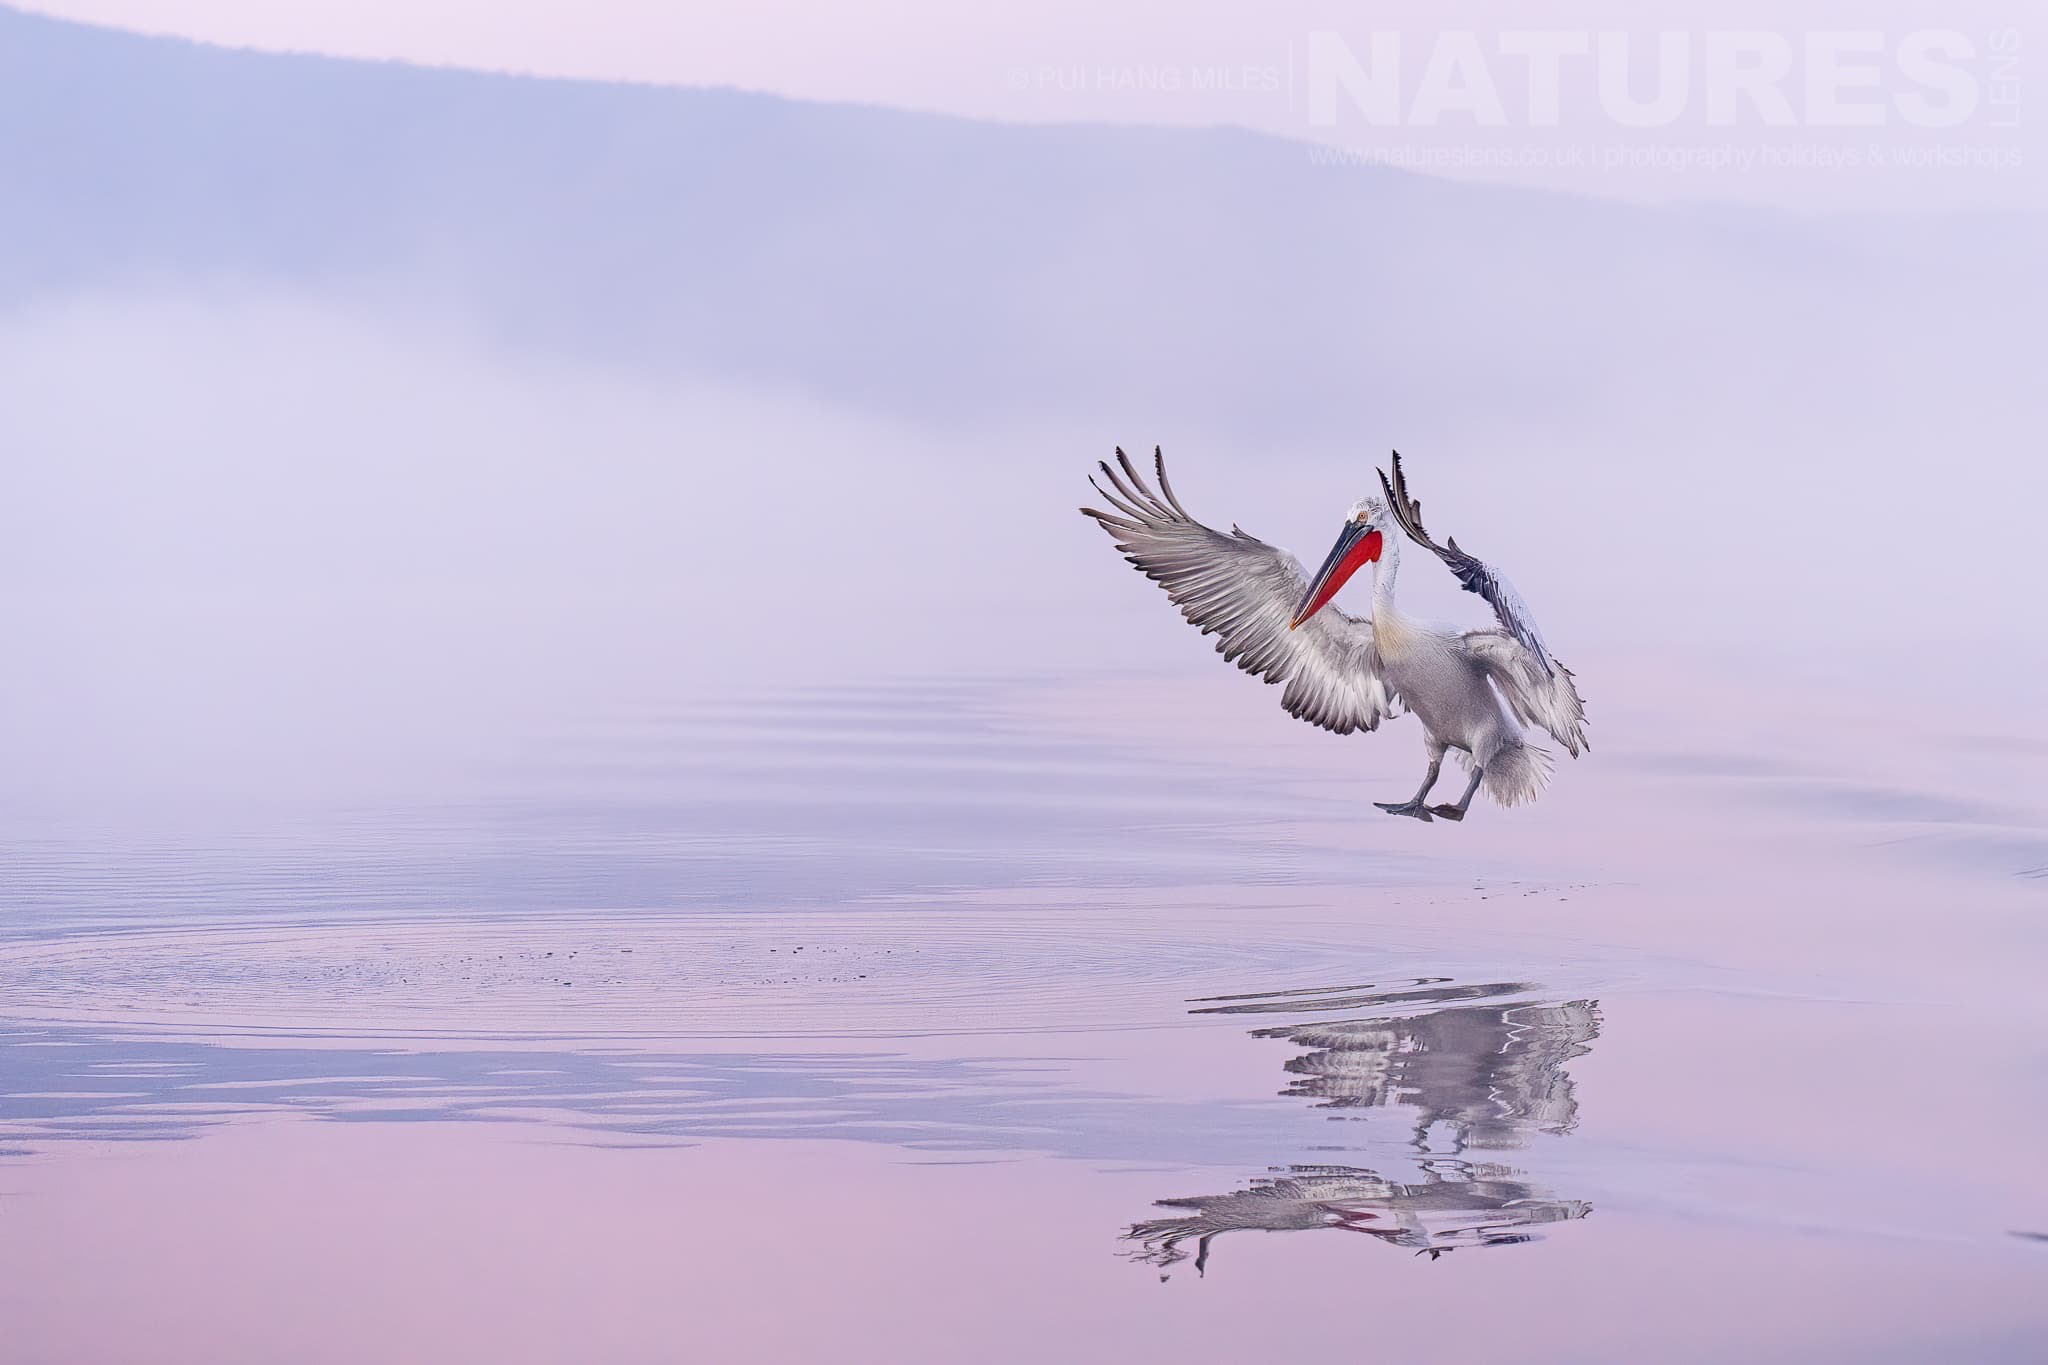 One Of The Pelicans Of Lake Kerkini Comes In To Land On The Waters Of The Lake Photographed During A Natureslens Pelicans Of Lake Kerkini Photography Holiday